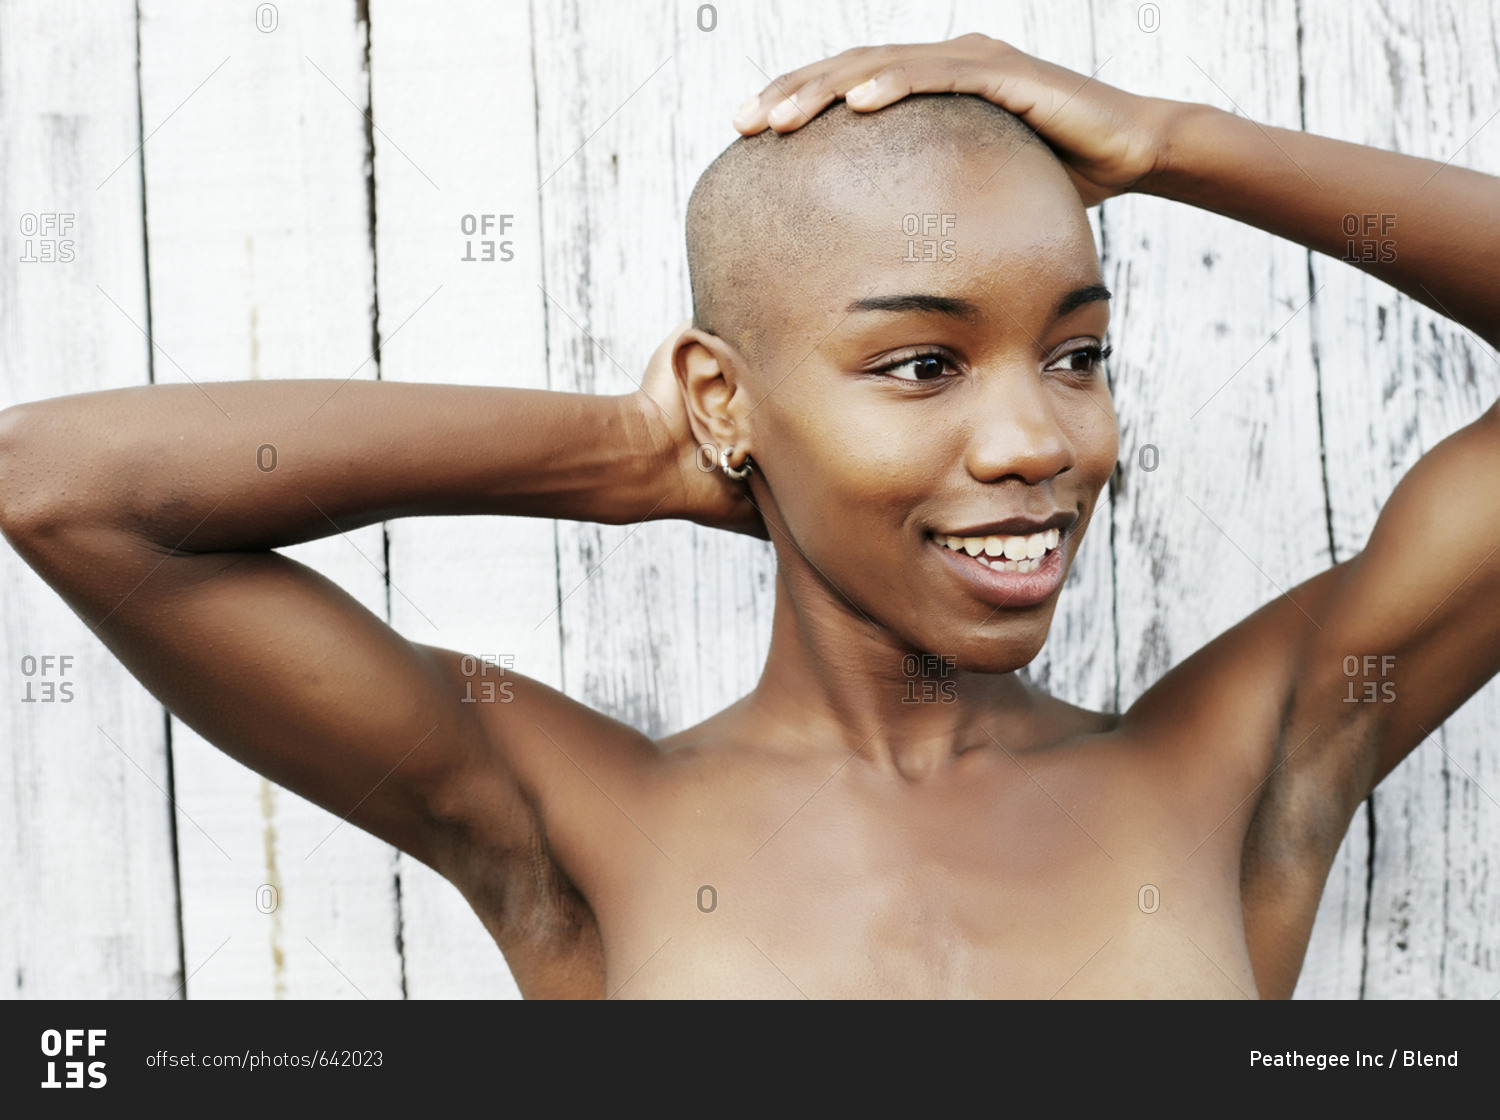 Bald African Nude - Close up of naked black woman rubbing bald head stock photo - OFFSET